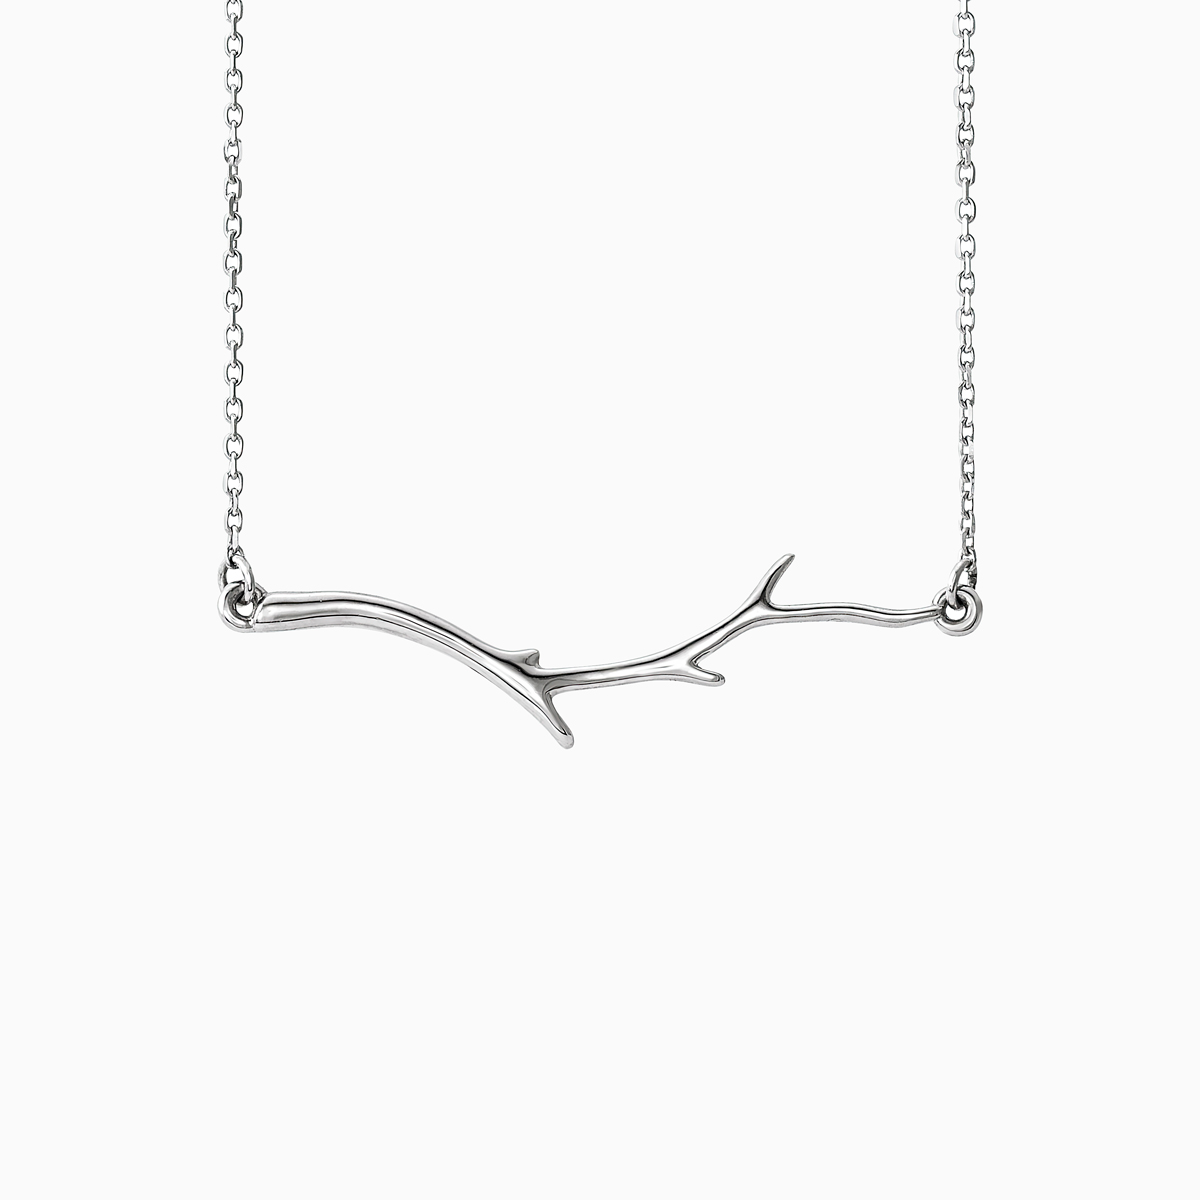 Twig Necklace, 18 inches, 14k Gold